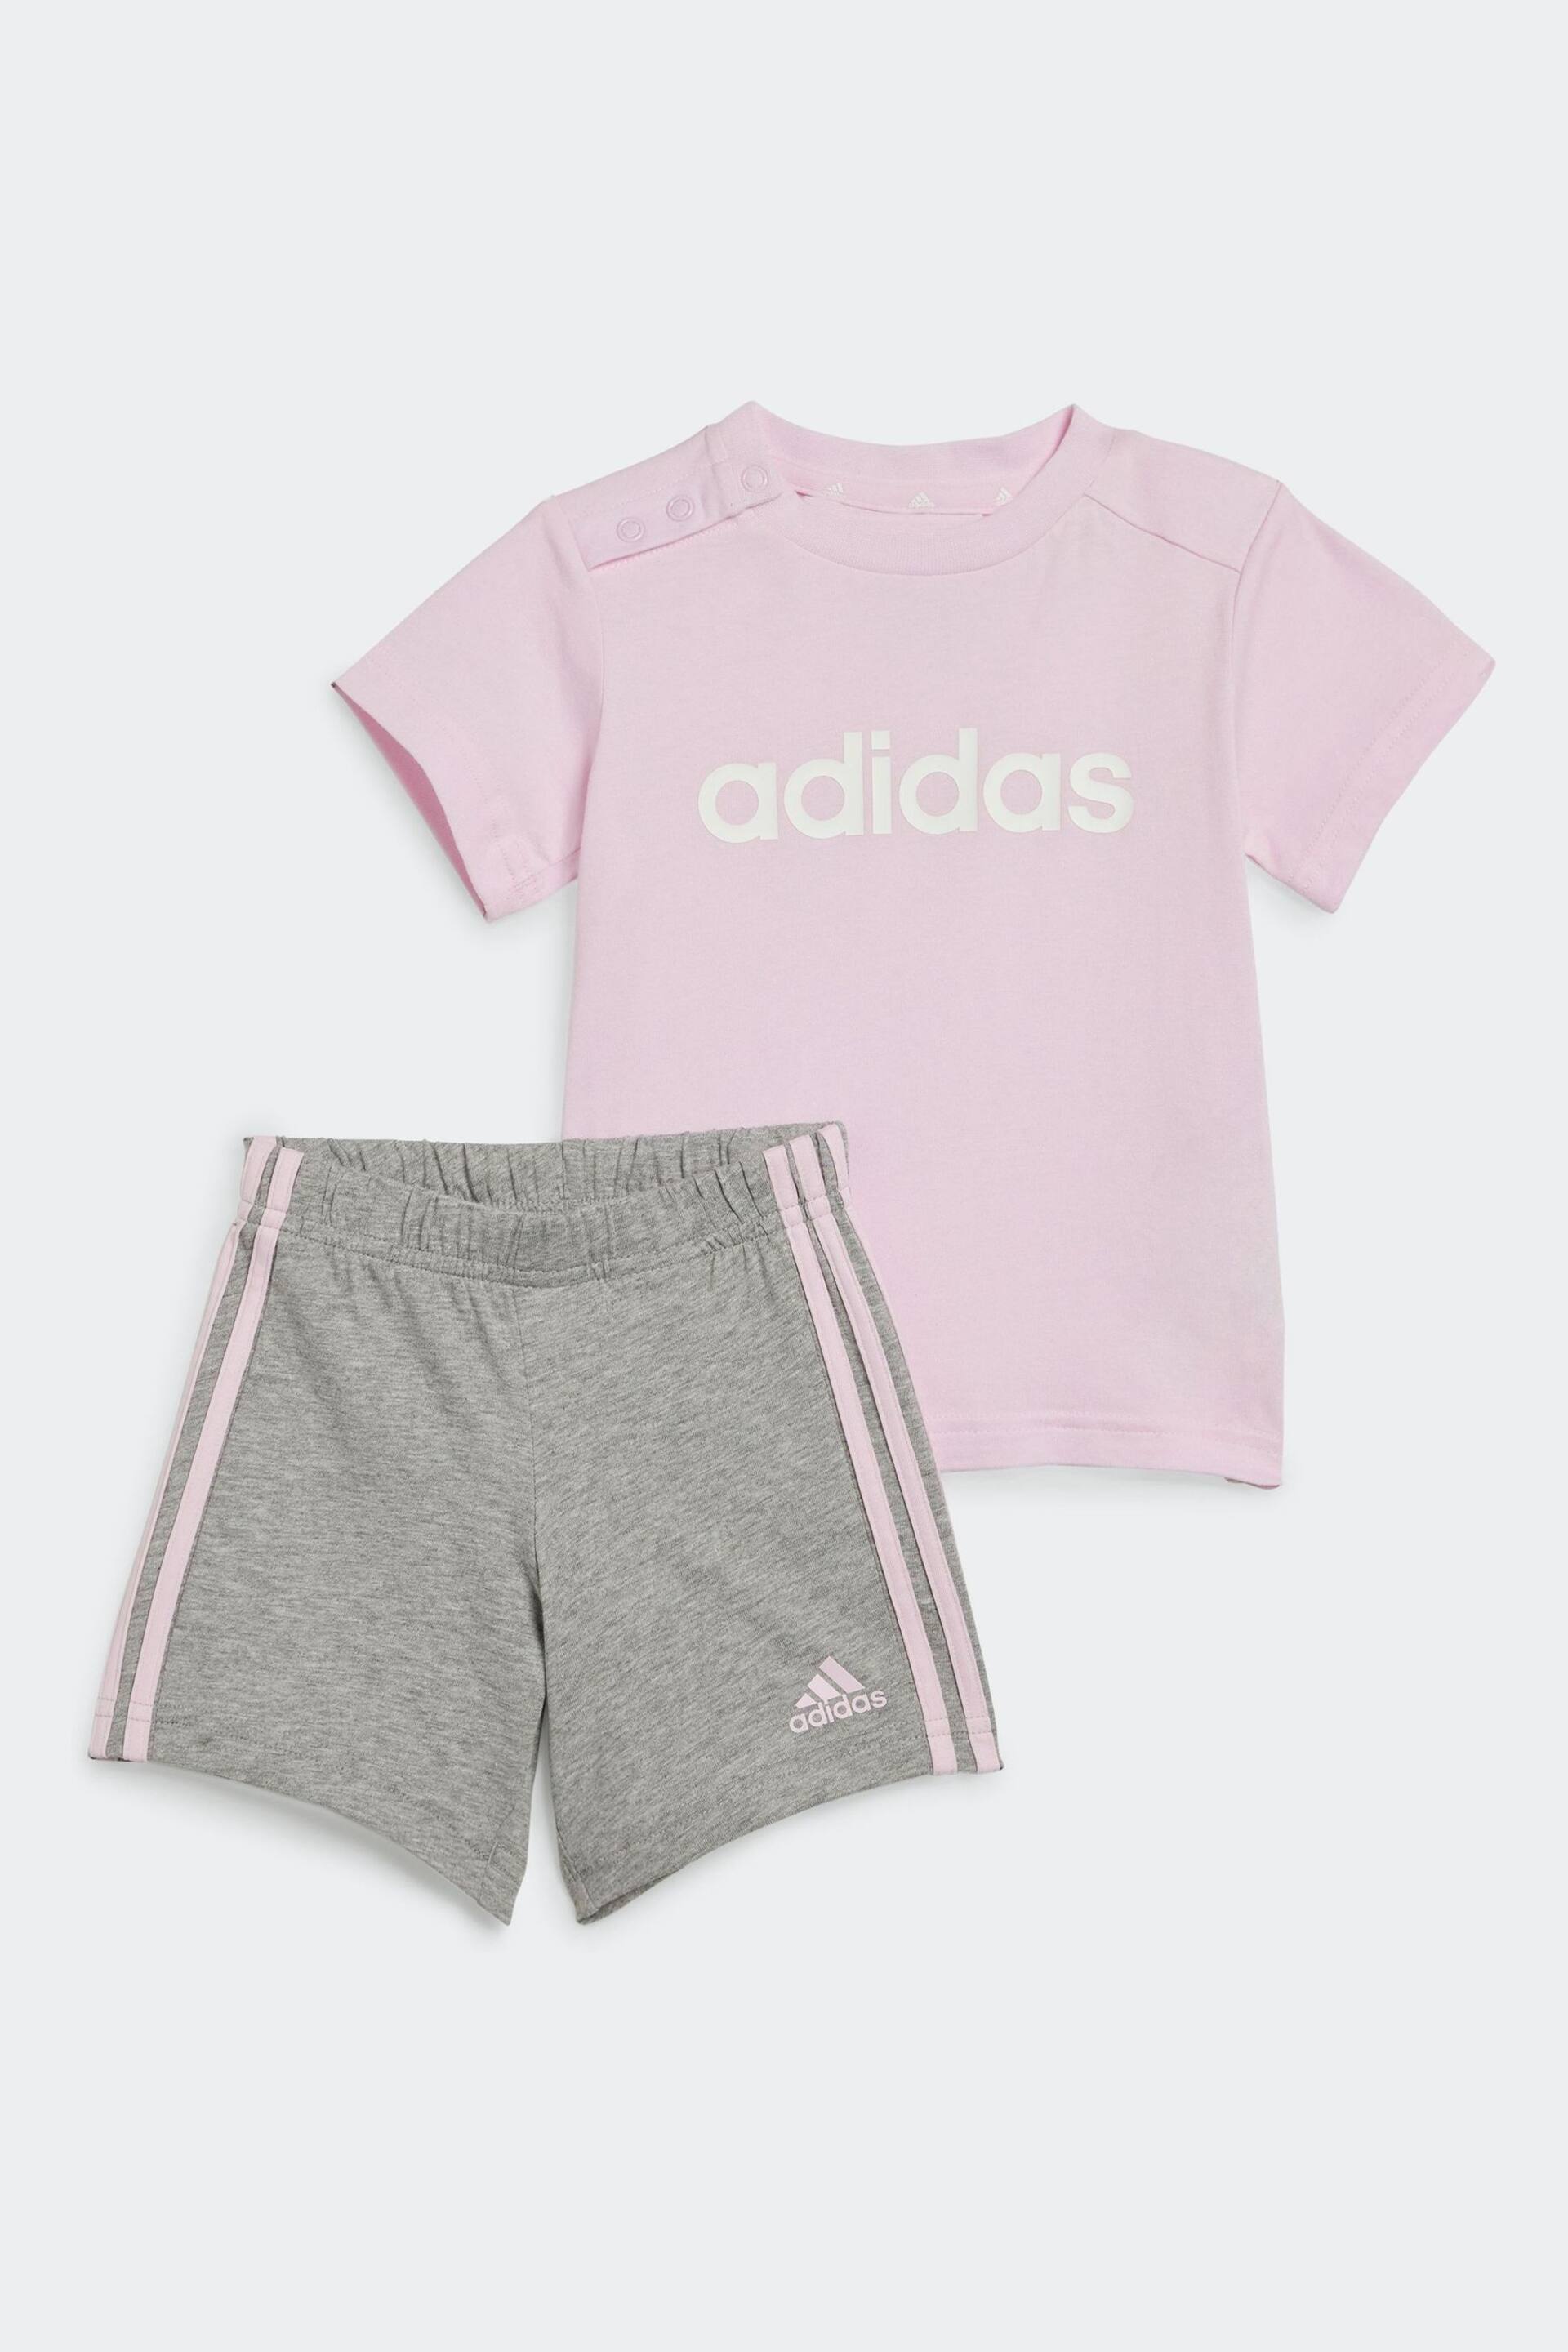 adidas Pink/Grey Sportswear Essentials Lineage Organic Cotton T-Shirt And Shorts Set - Image 1 of 6